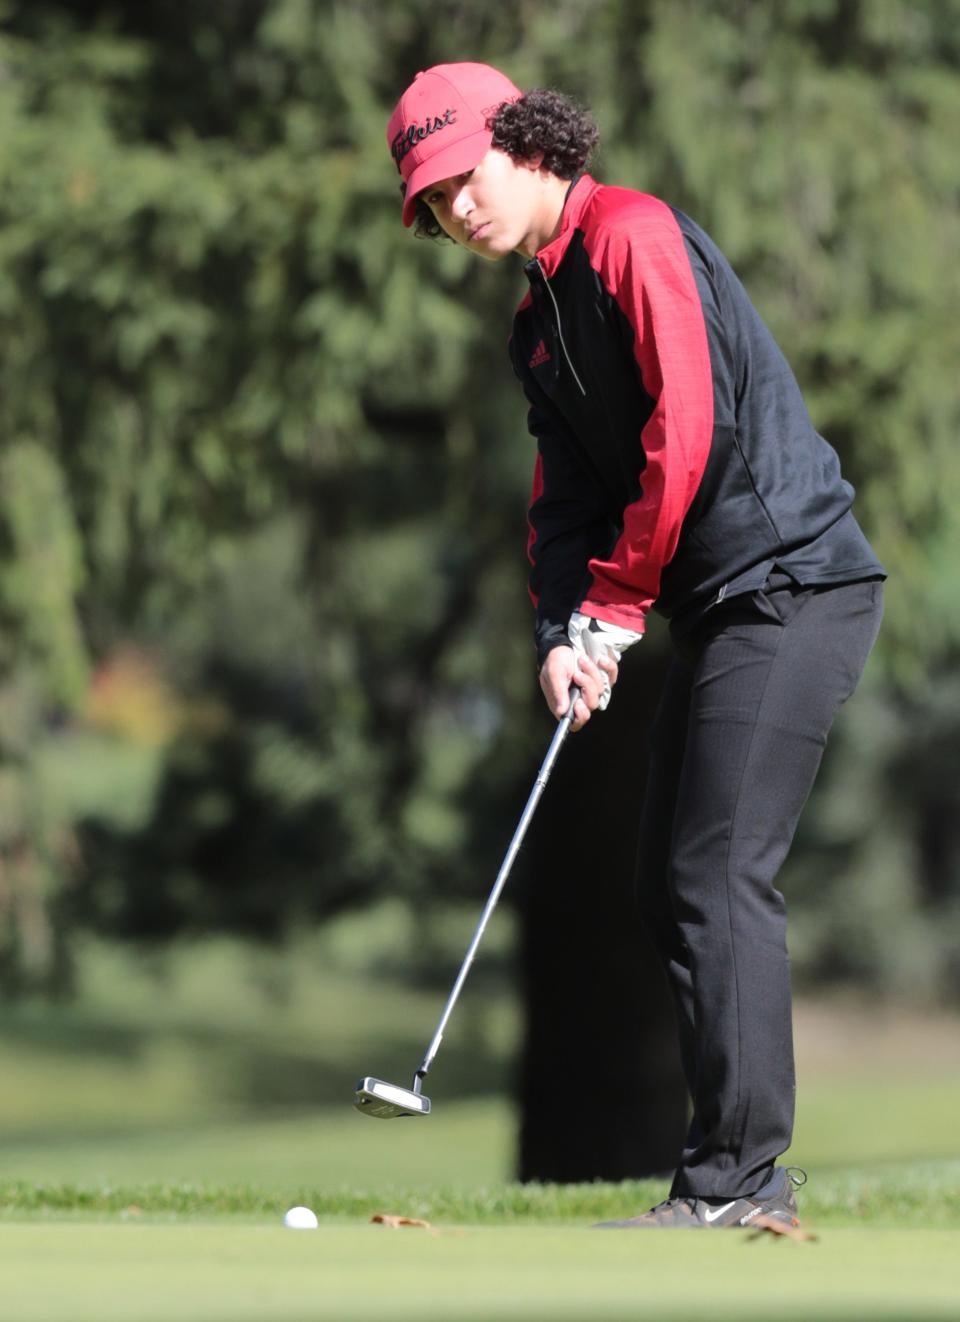 McKinley’s Carter Demetro putts on hole 5 at the Division I sectional tournament at Tannenhauf Golf Club Tuesday, October 4, 2022.